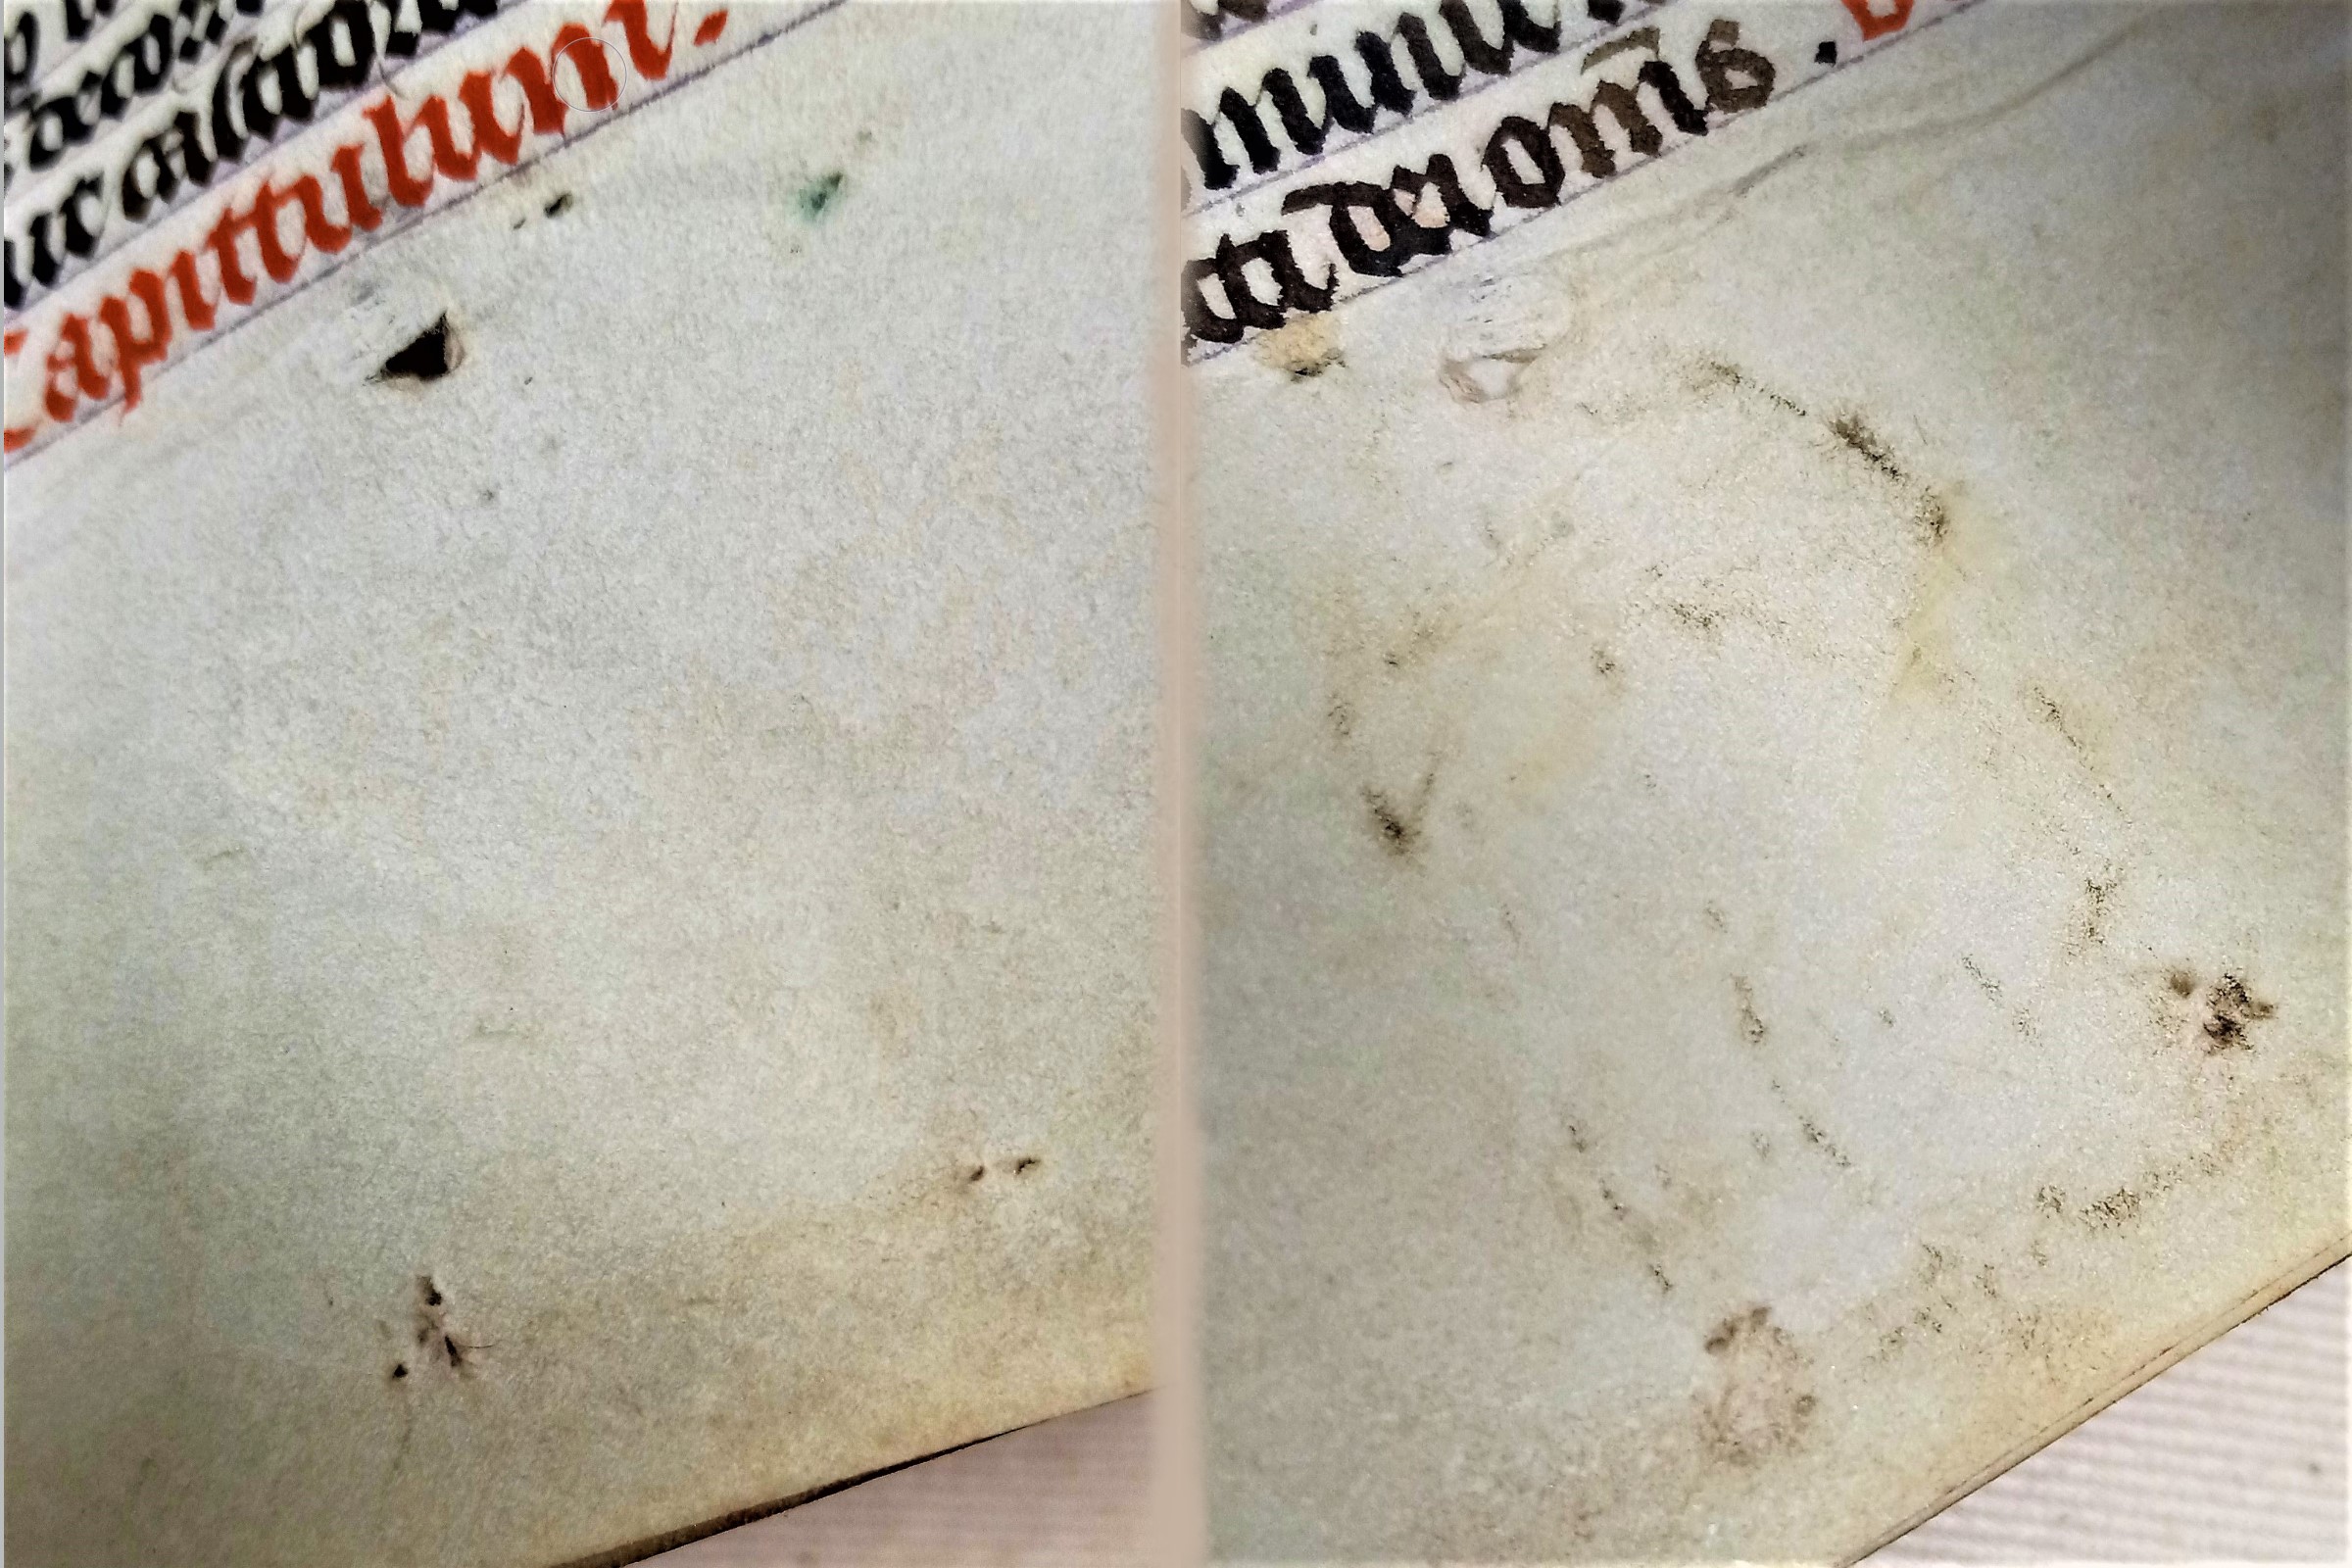 Sewing holes and metal smudges in the bottom margin of a page